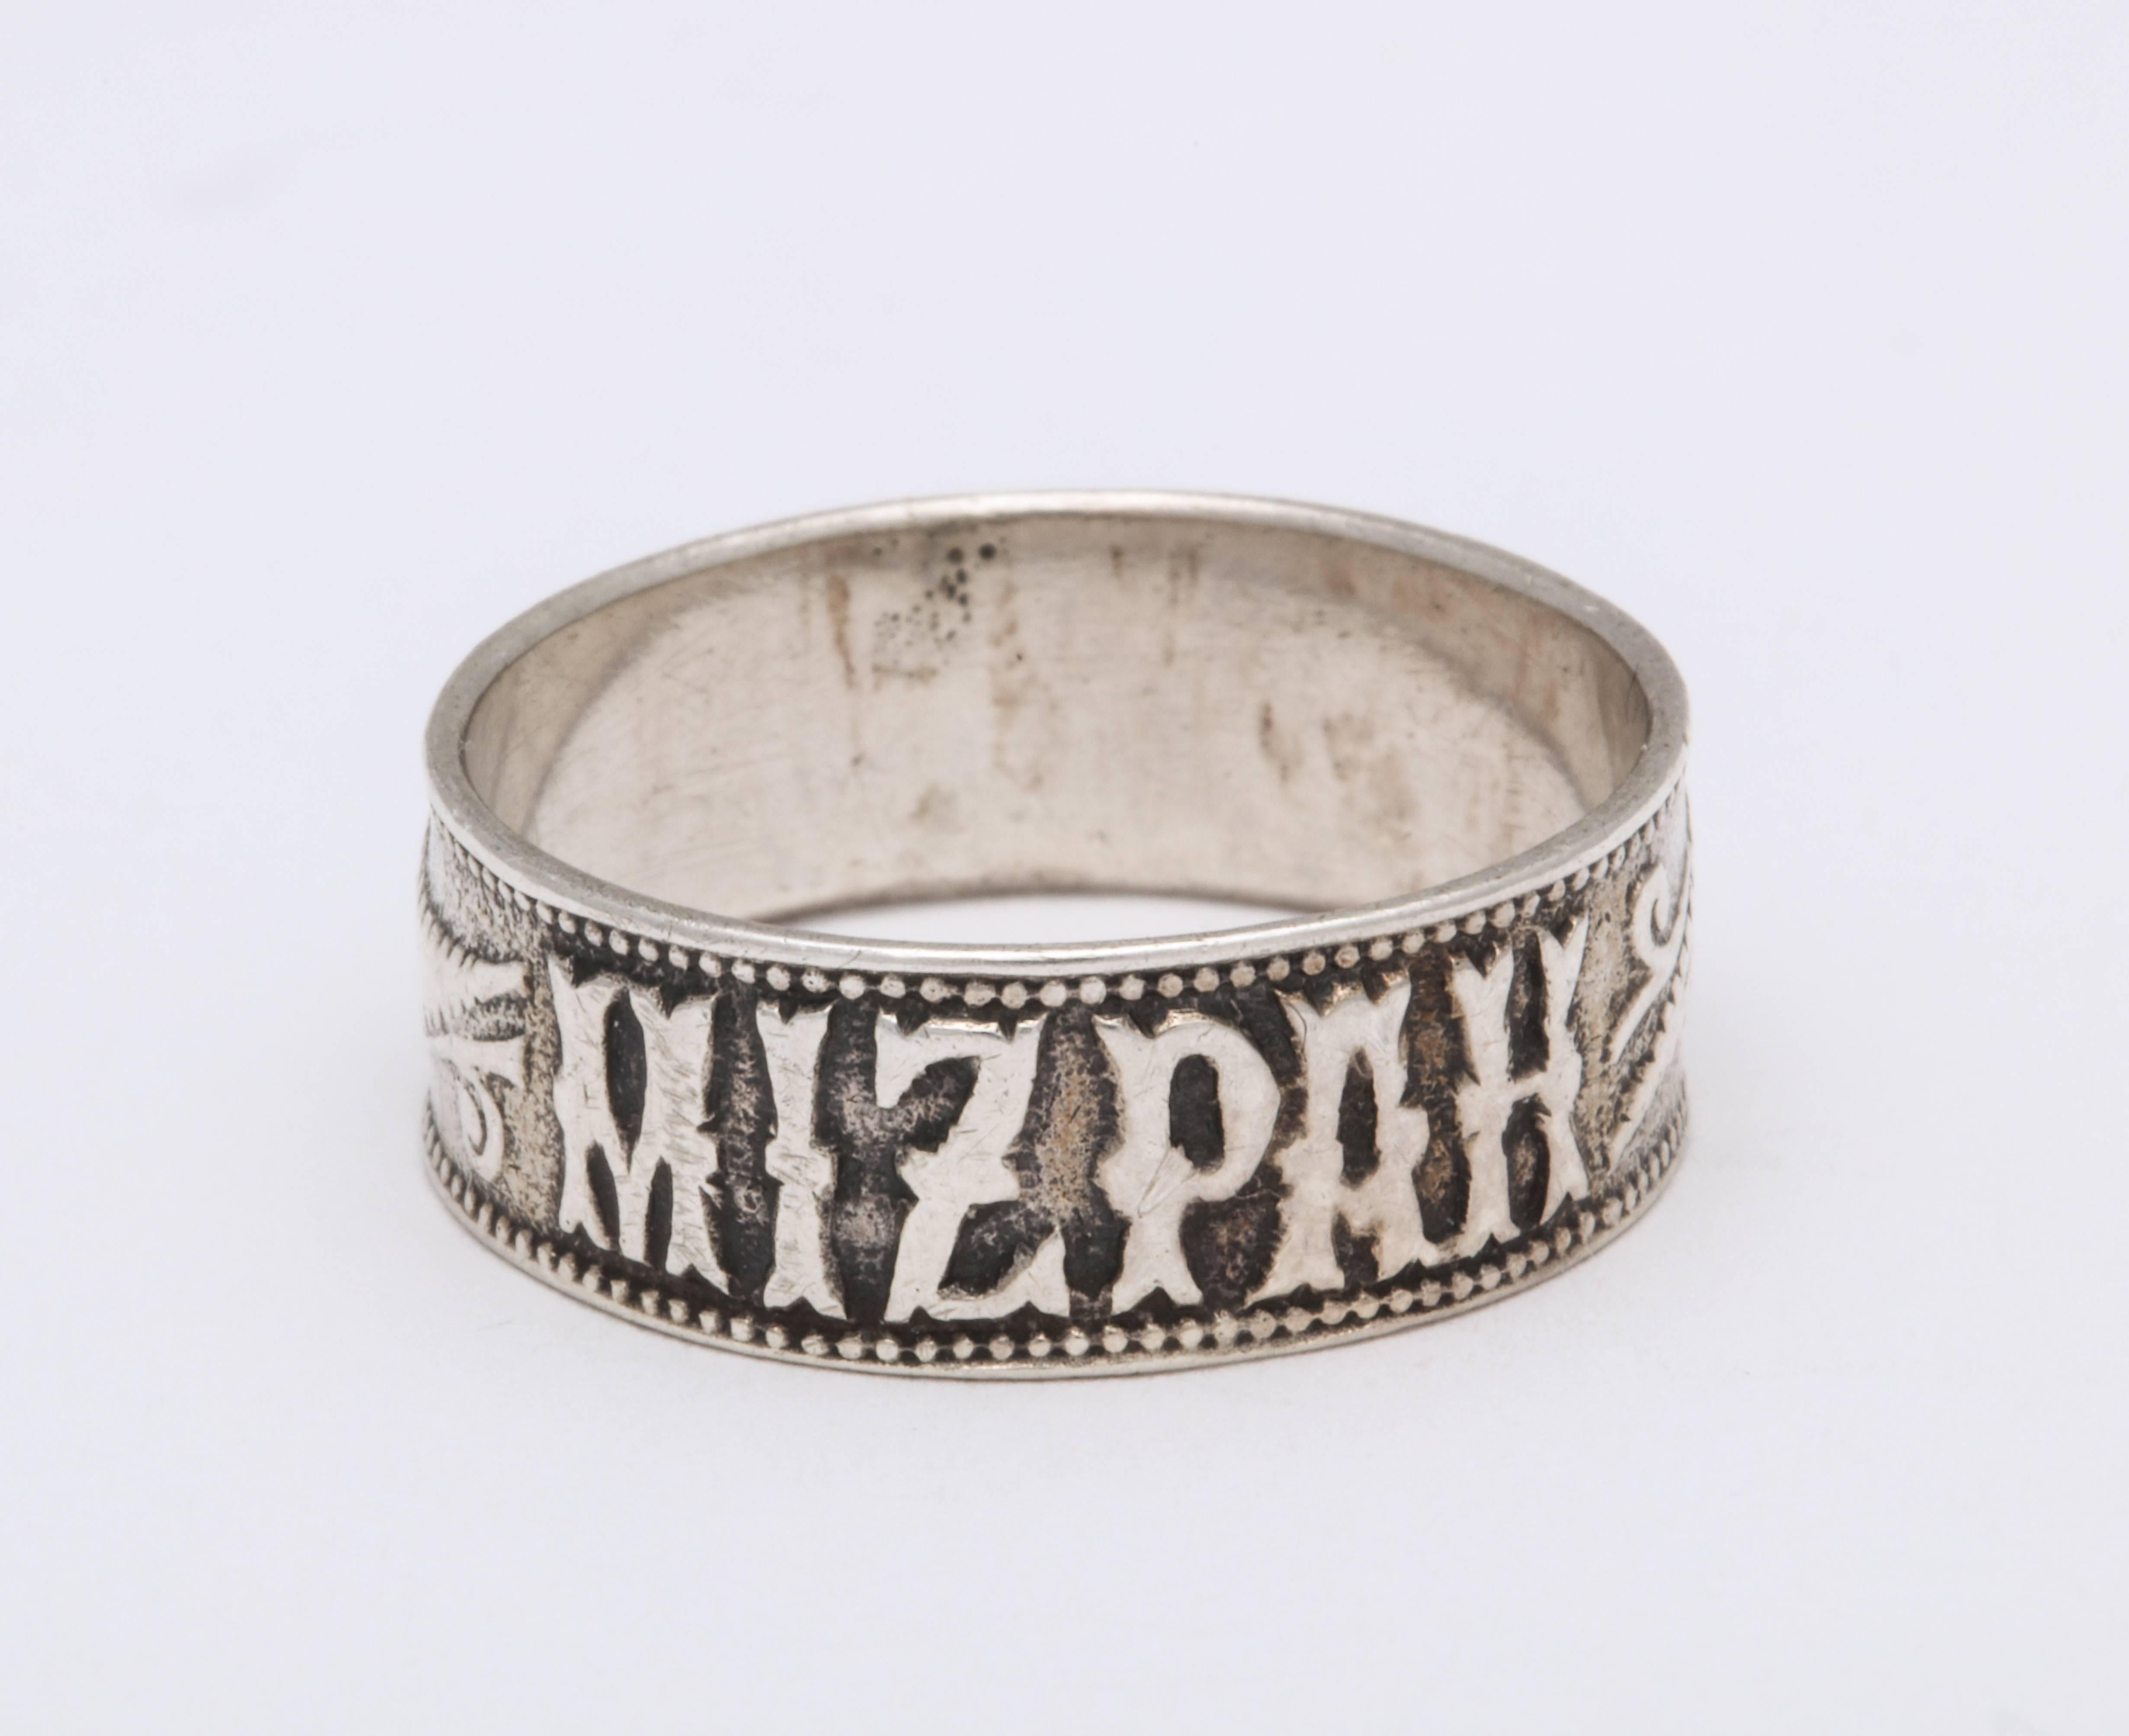 Engraving of ferns and a beaded border are clearly and deftly engraved on this Victorian Sterling Silver Mizpah Ring. c. 1860. . I have not seen this floral engraving before in a Mizpah ring and is does make a beautiful and unique band. Mizpah is